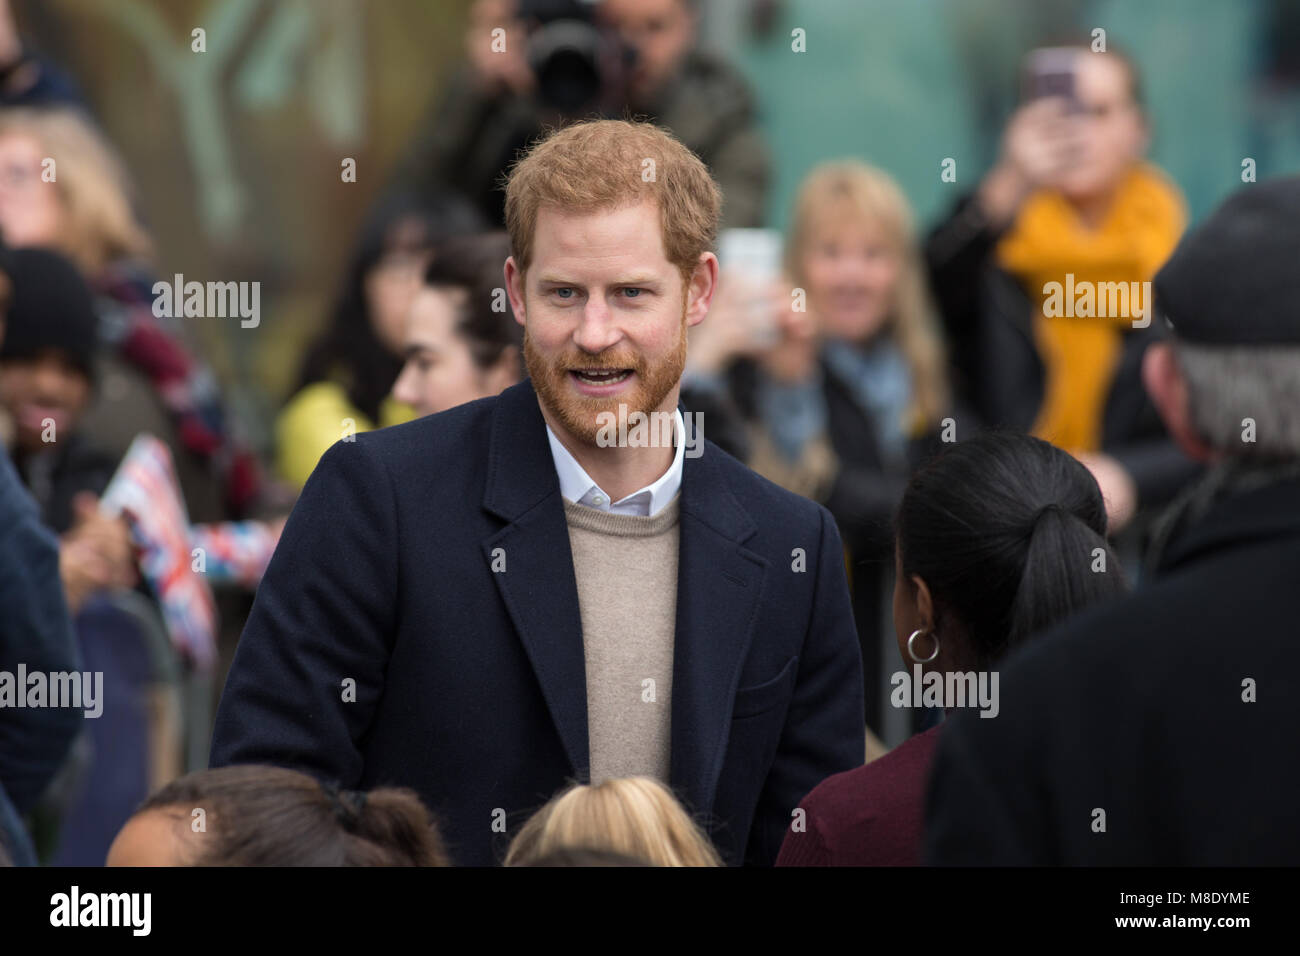 Megan Markle and Prince Harry visited Millennium Point in Birmingham on International Women's Day. Prince Harry talking to fans on arrival. Stock Photo